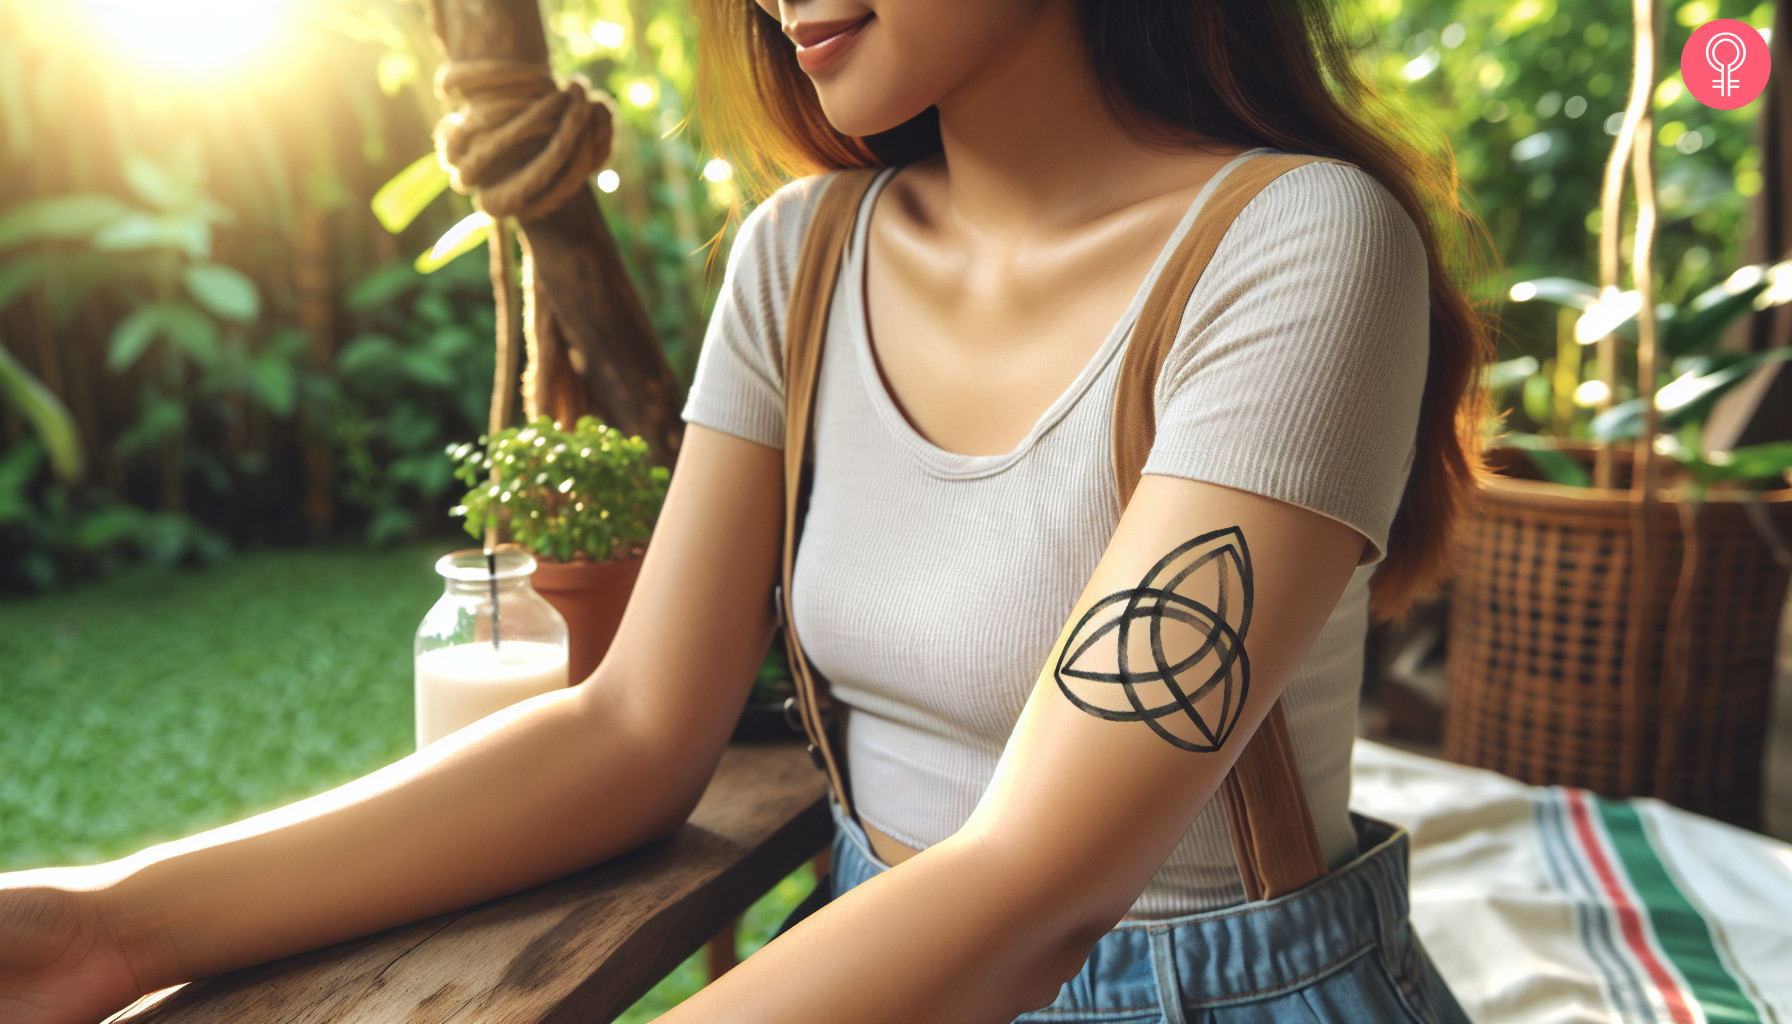 Trinity knot triquetra tattoo on the upper arm of a woman